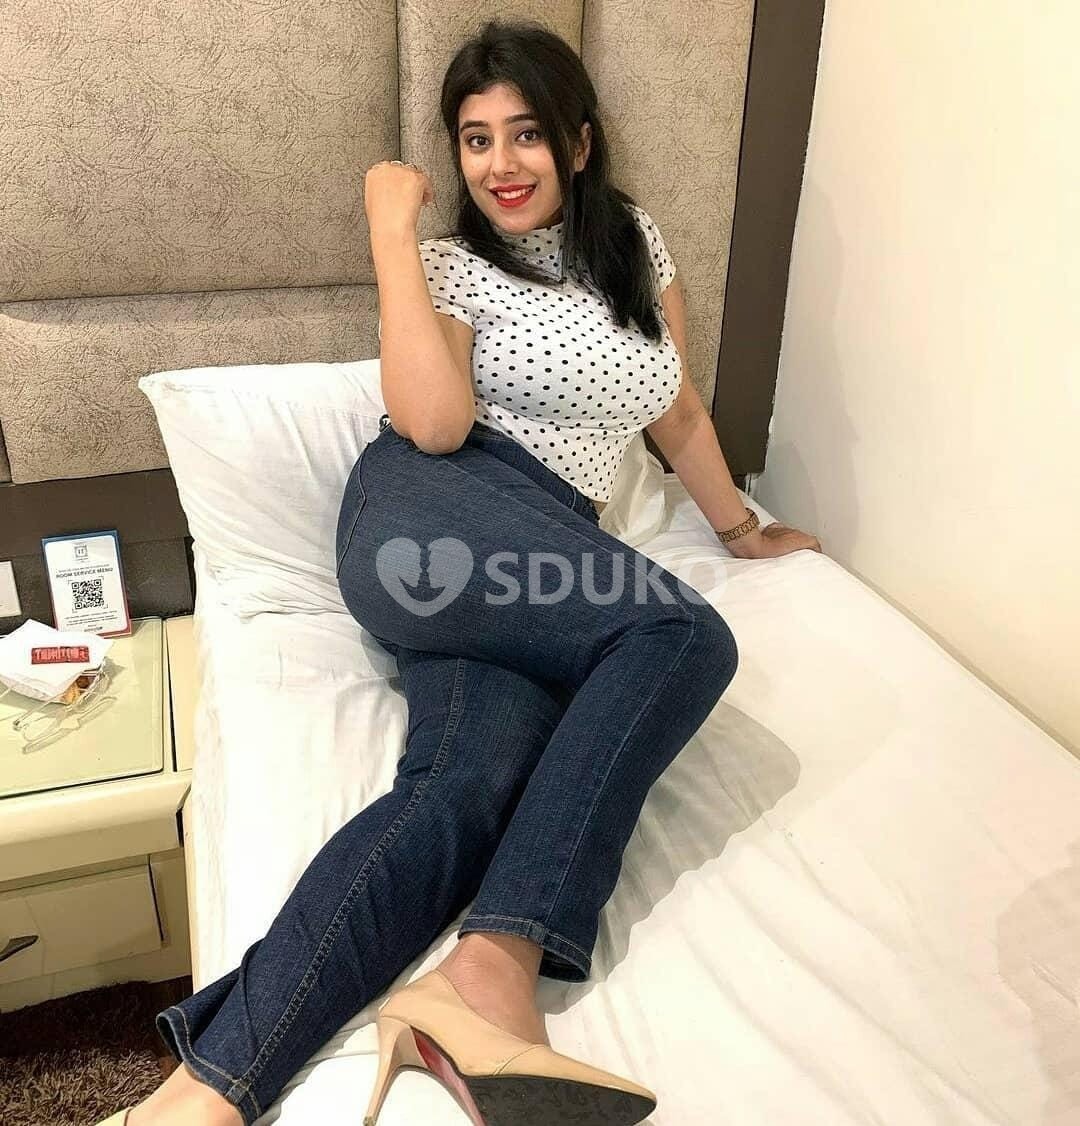 MOUNT ROAD ♥️ (CHENNAI) MYSELF SWETA CALL GIRL & BODY-2-BODY MASSAGE SPA SERVICES OUTCALL OUTCALL INCALL 24 HOURS...